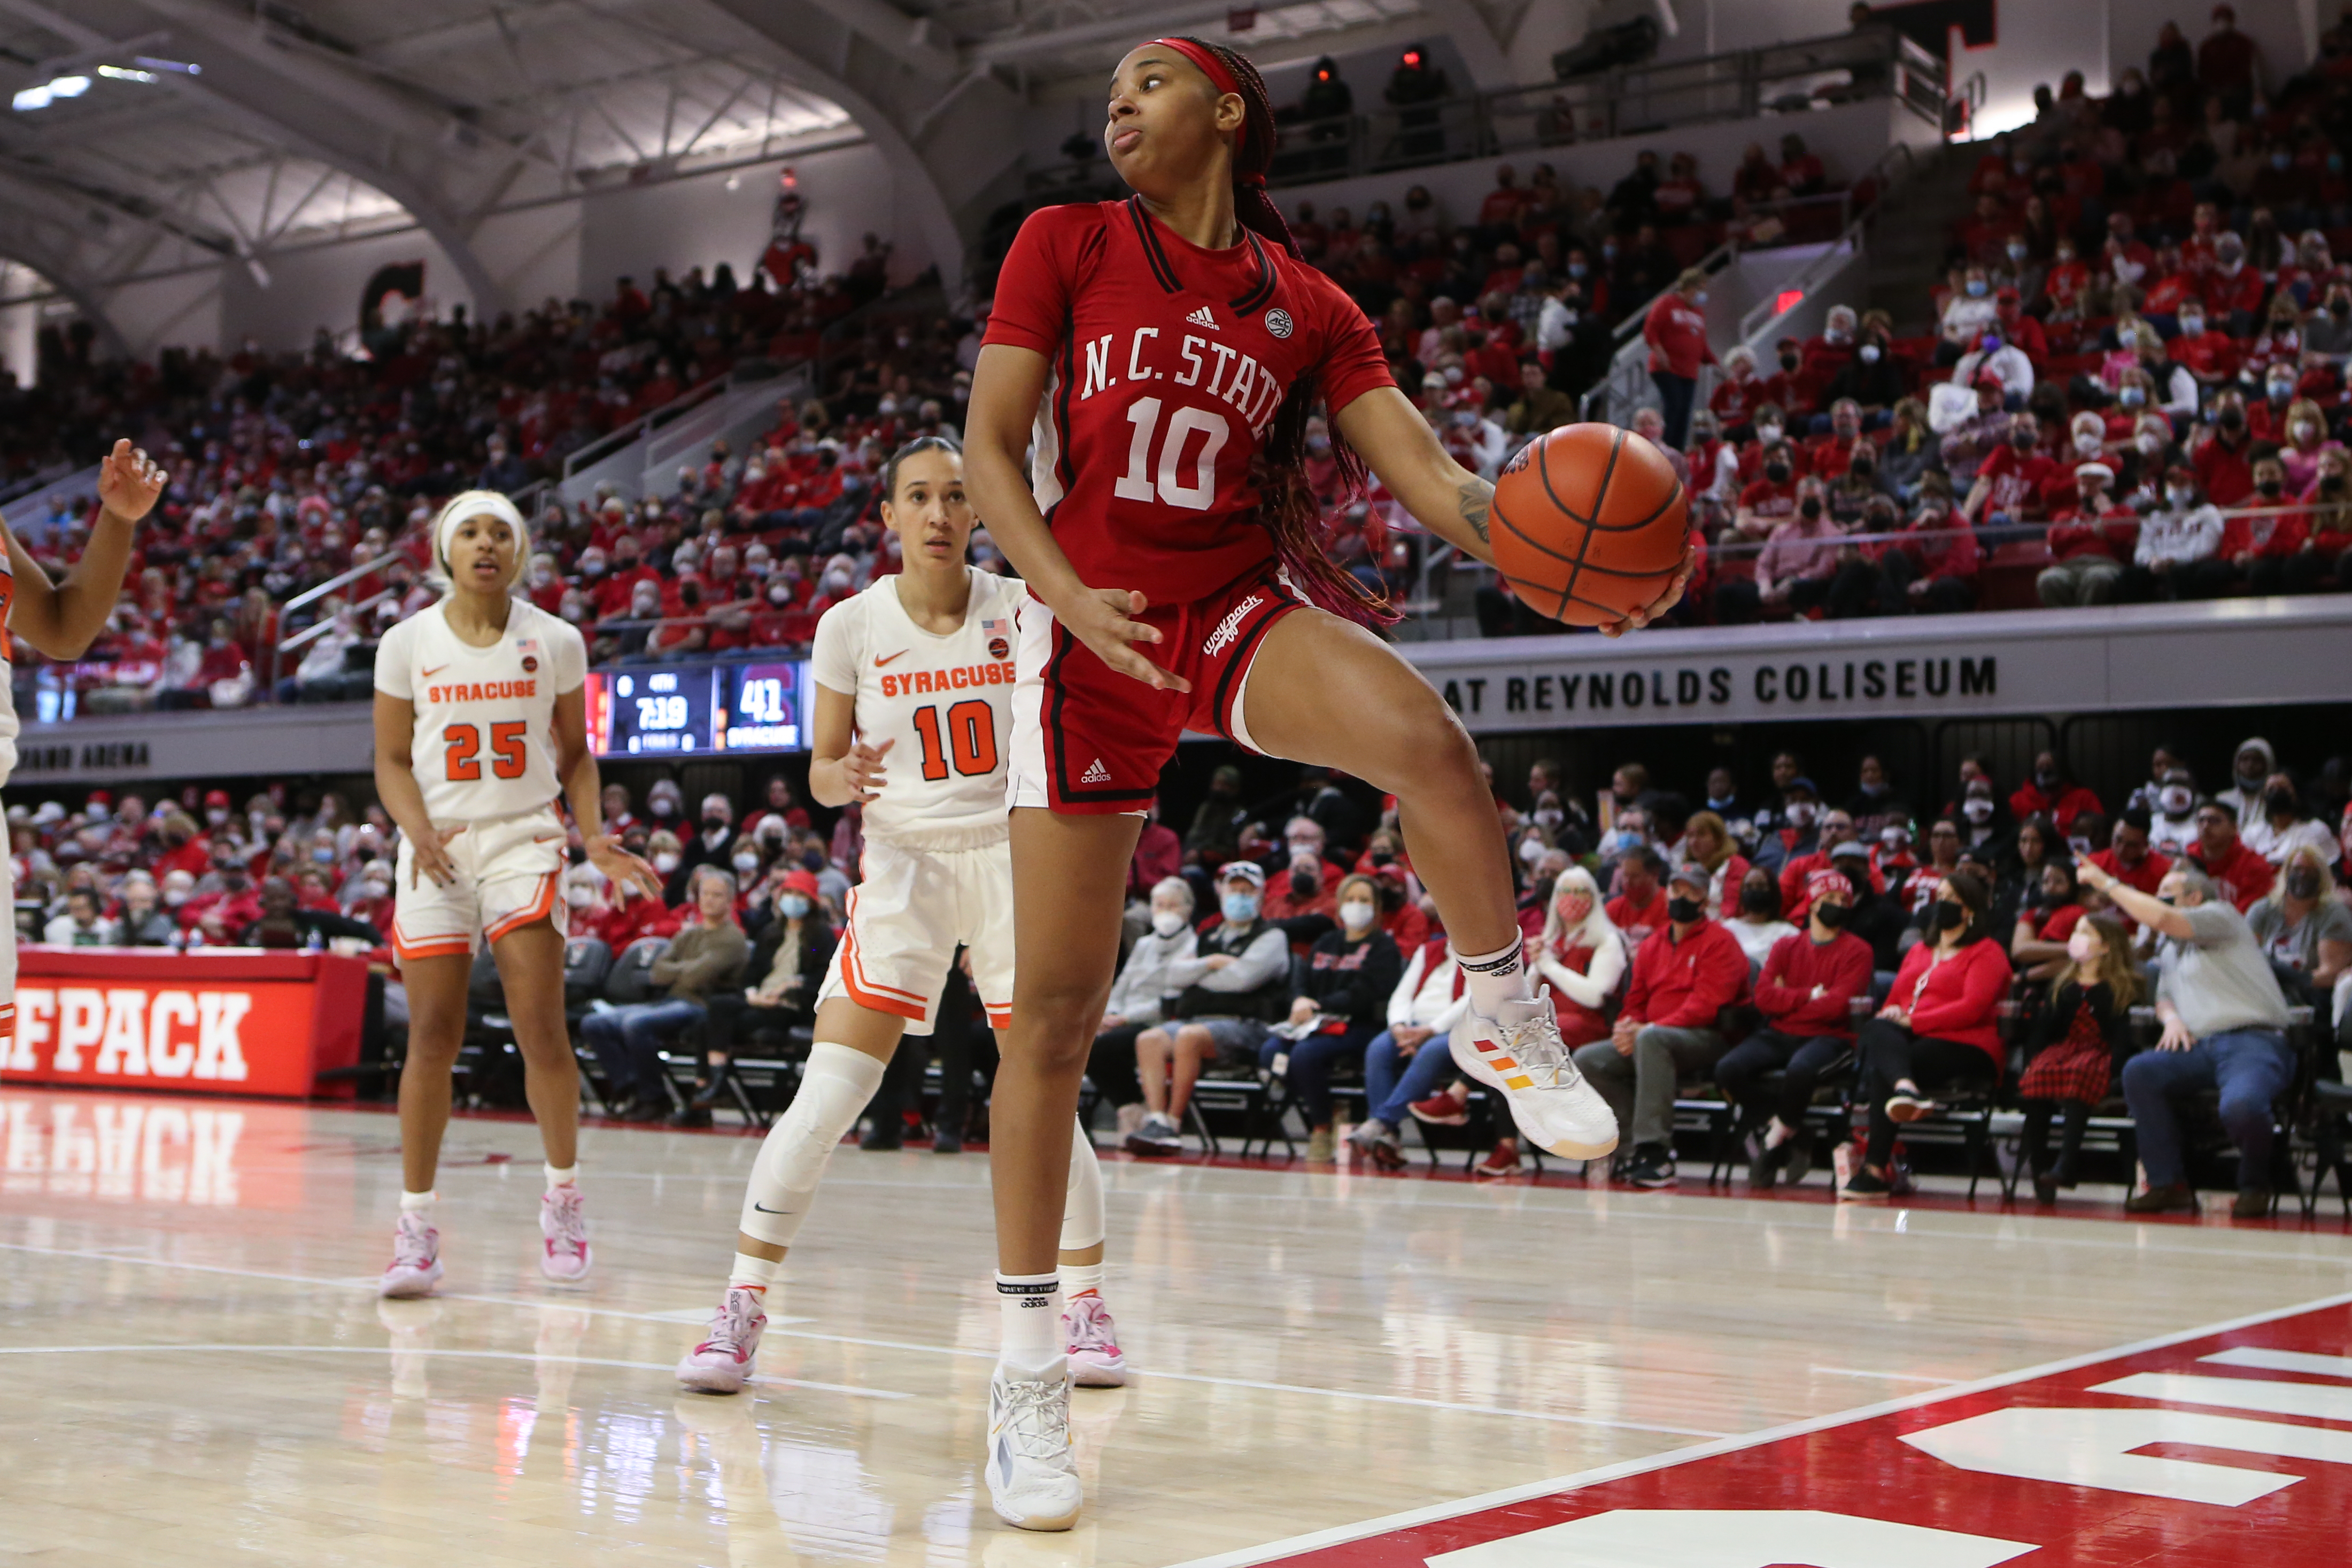 COLLEGE BASKETBALL: FEB 20 Women’s - Syracuse at NC State